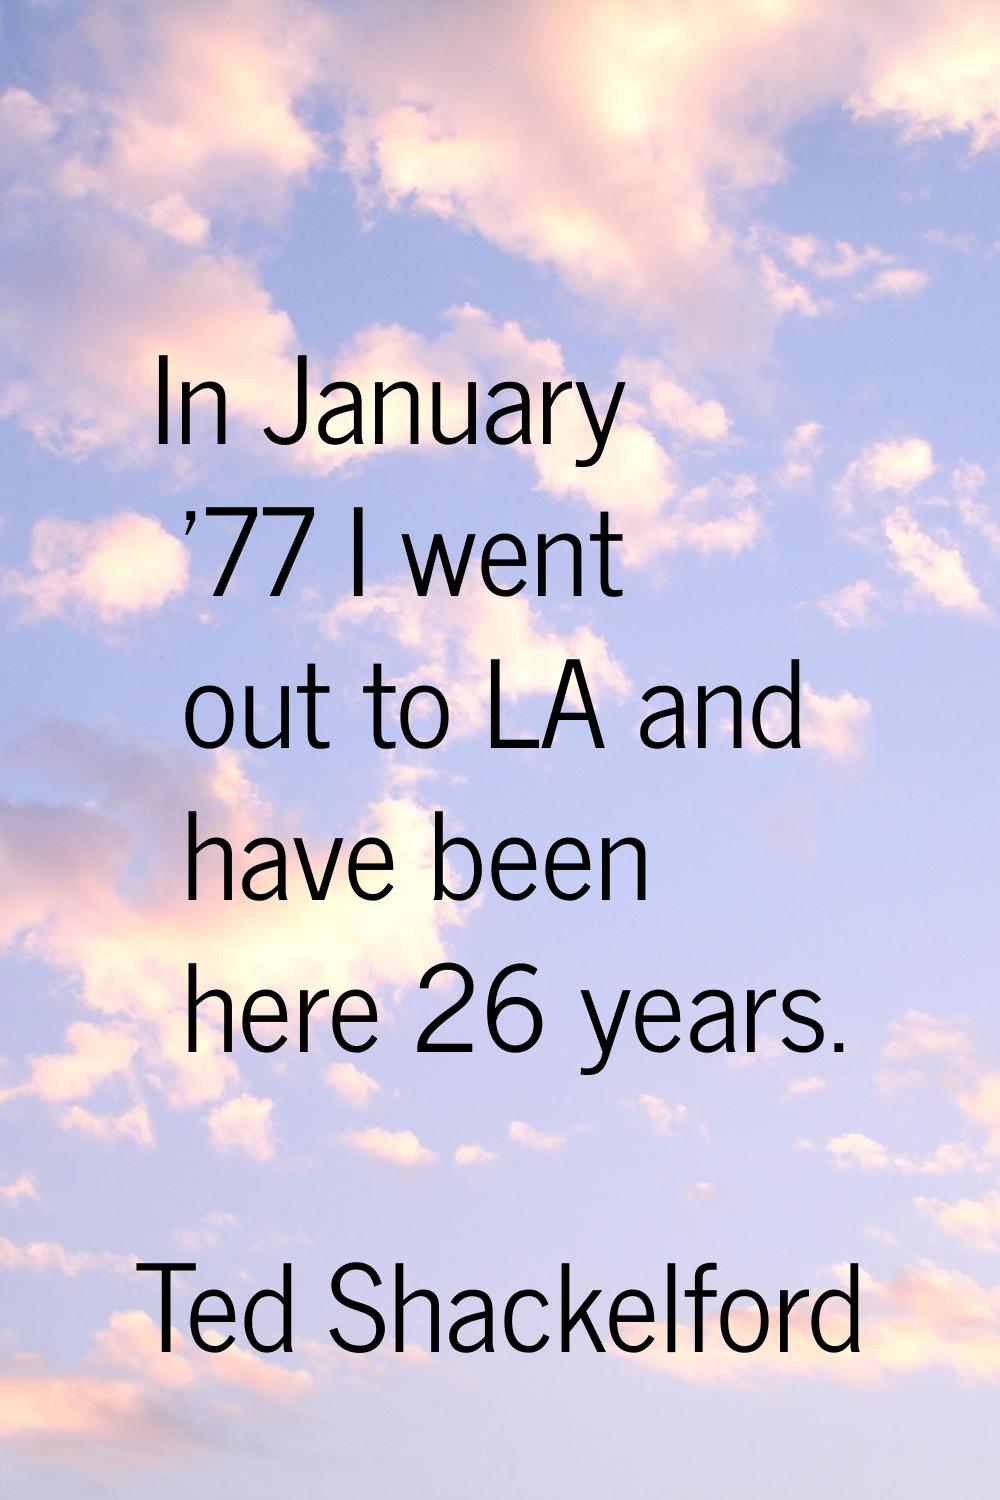 In January '77 I went out to LA and have been here 26 years.